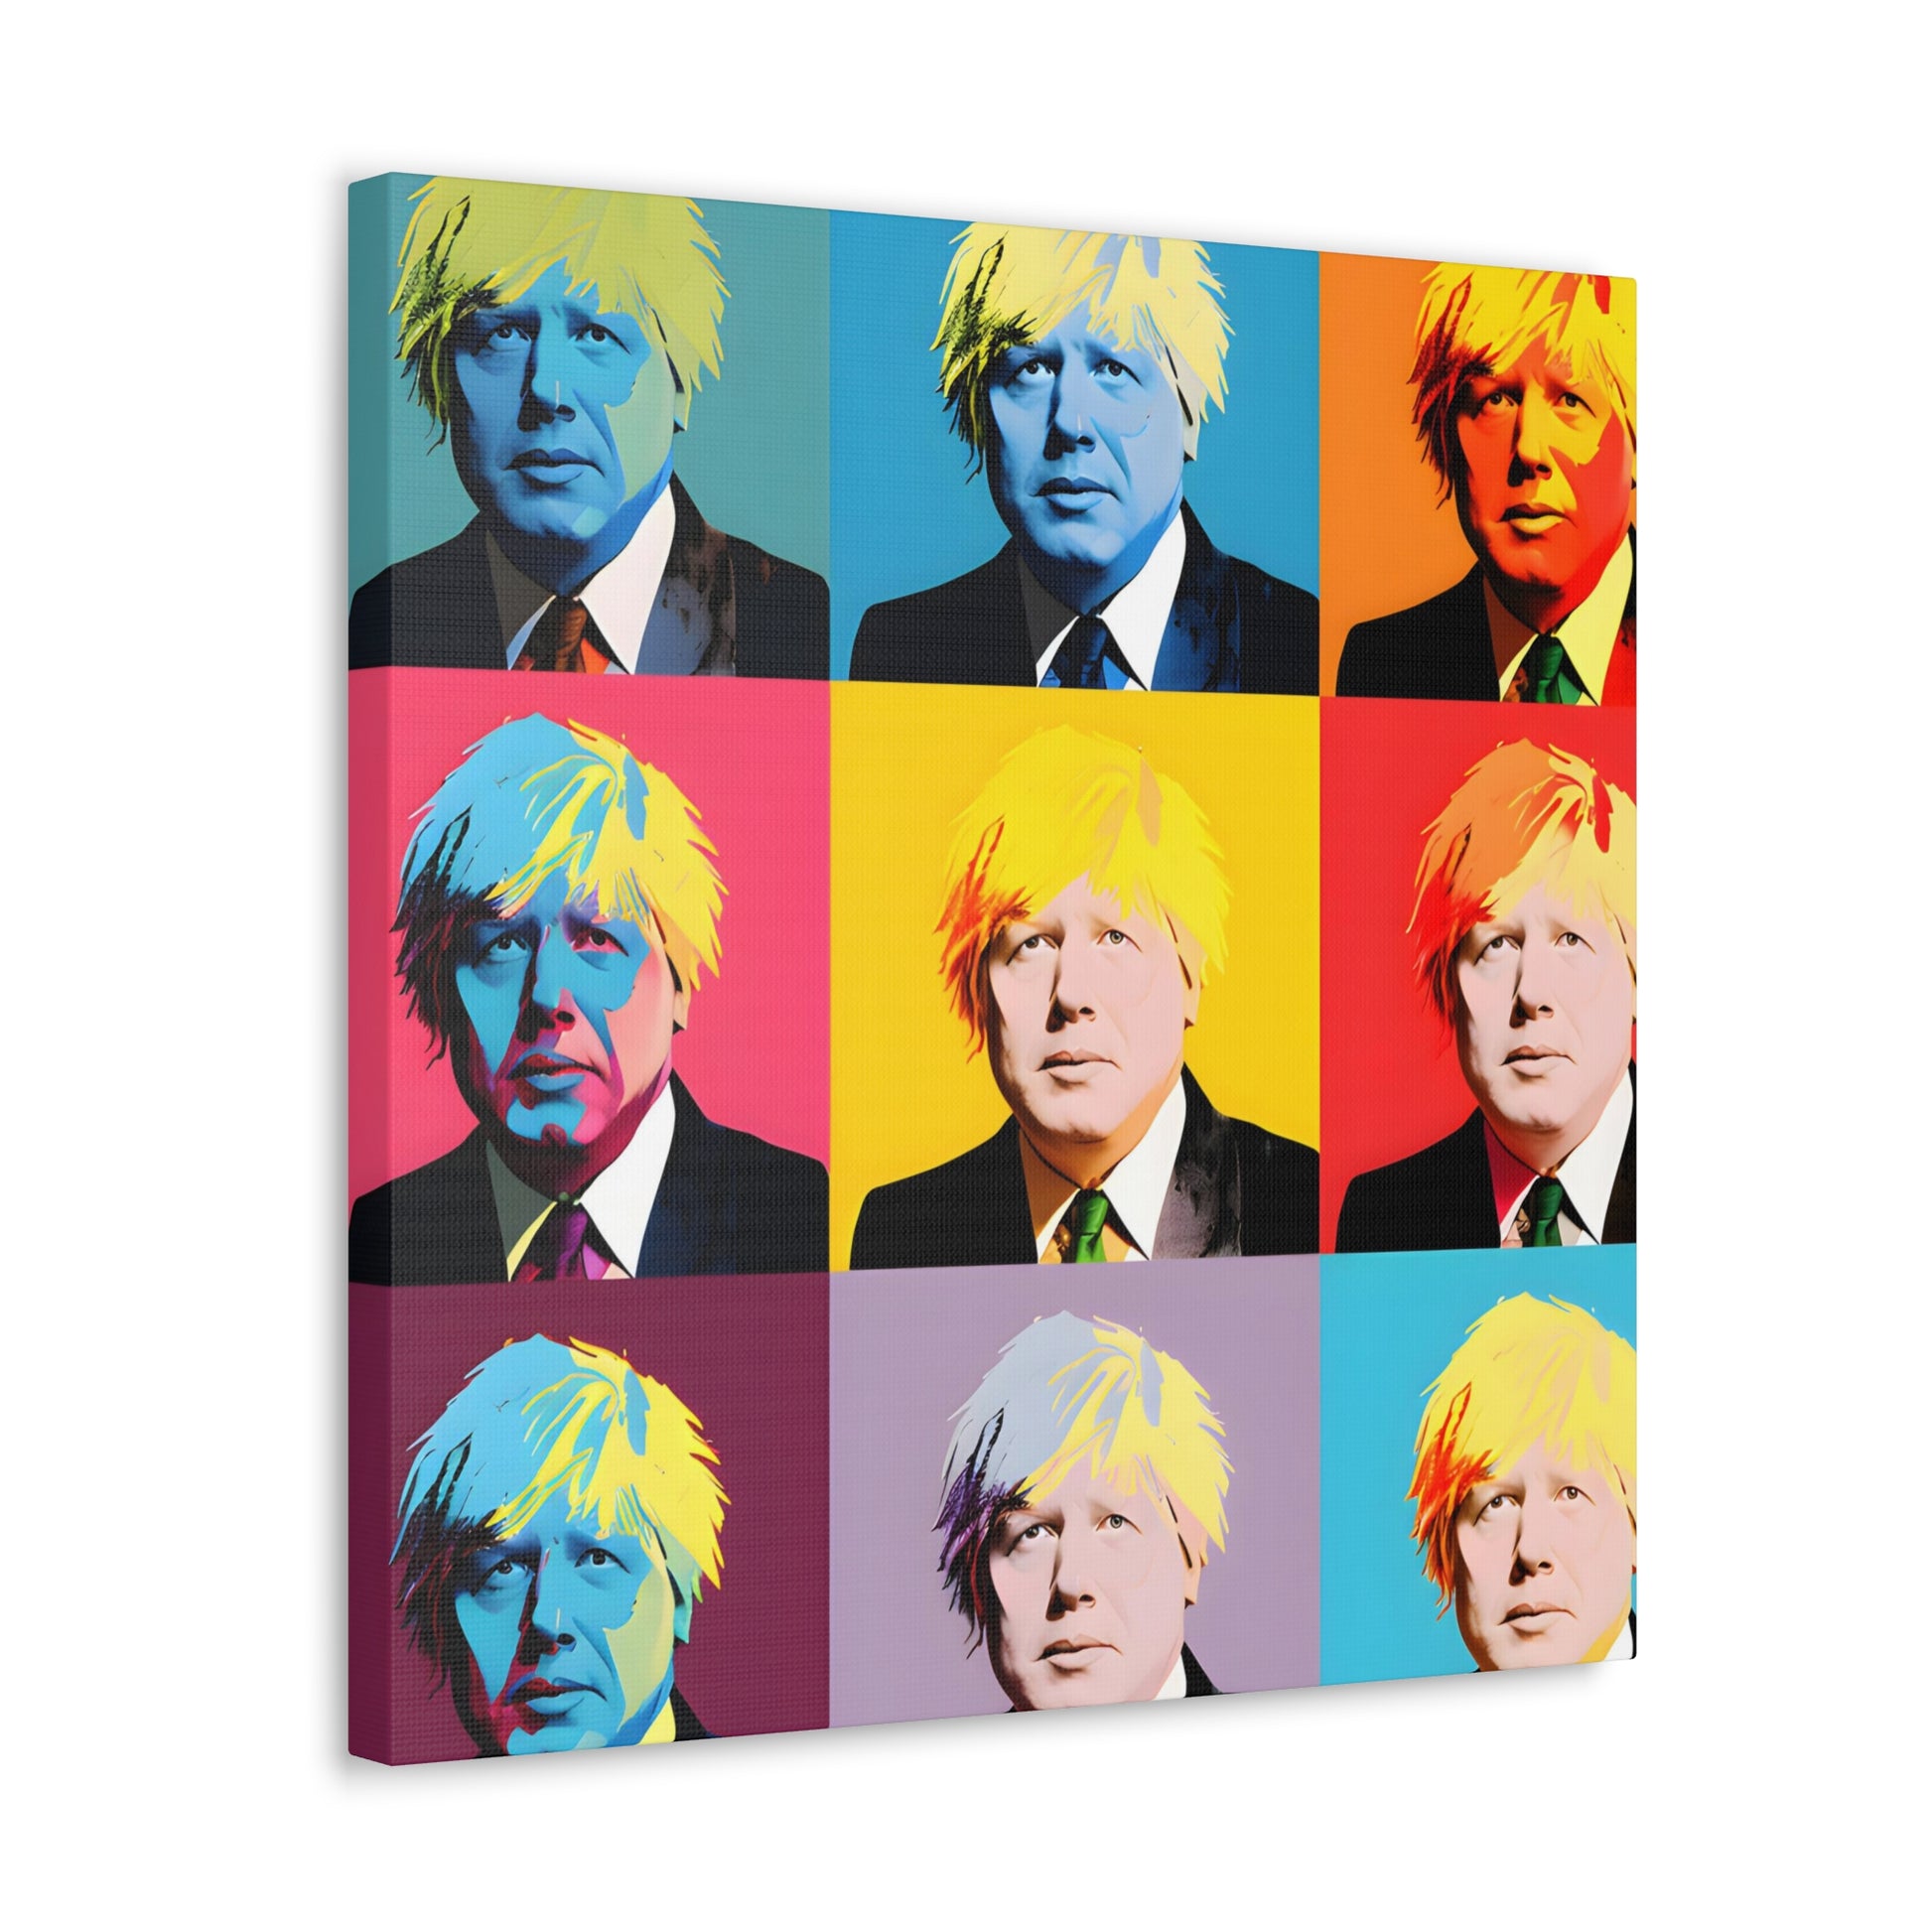 angled shot Artwork by Ava Richardson, a contemporary and vibrant depiction of political figure Boris Johnson in a pop art style akin to Andy Warhol. The image presents a satirical blend of politics and celebrity, with colorful, stylized forms that emphasize the intersection of Johnson's public persona and pop culture status, reflecting his notorious blending of personal and political life.